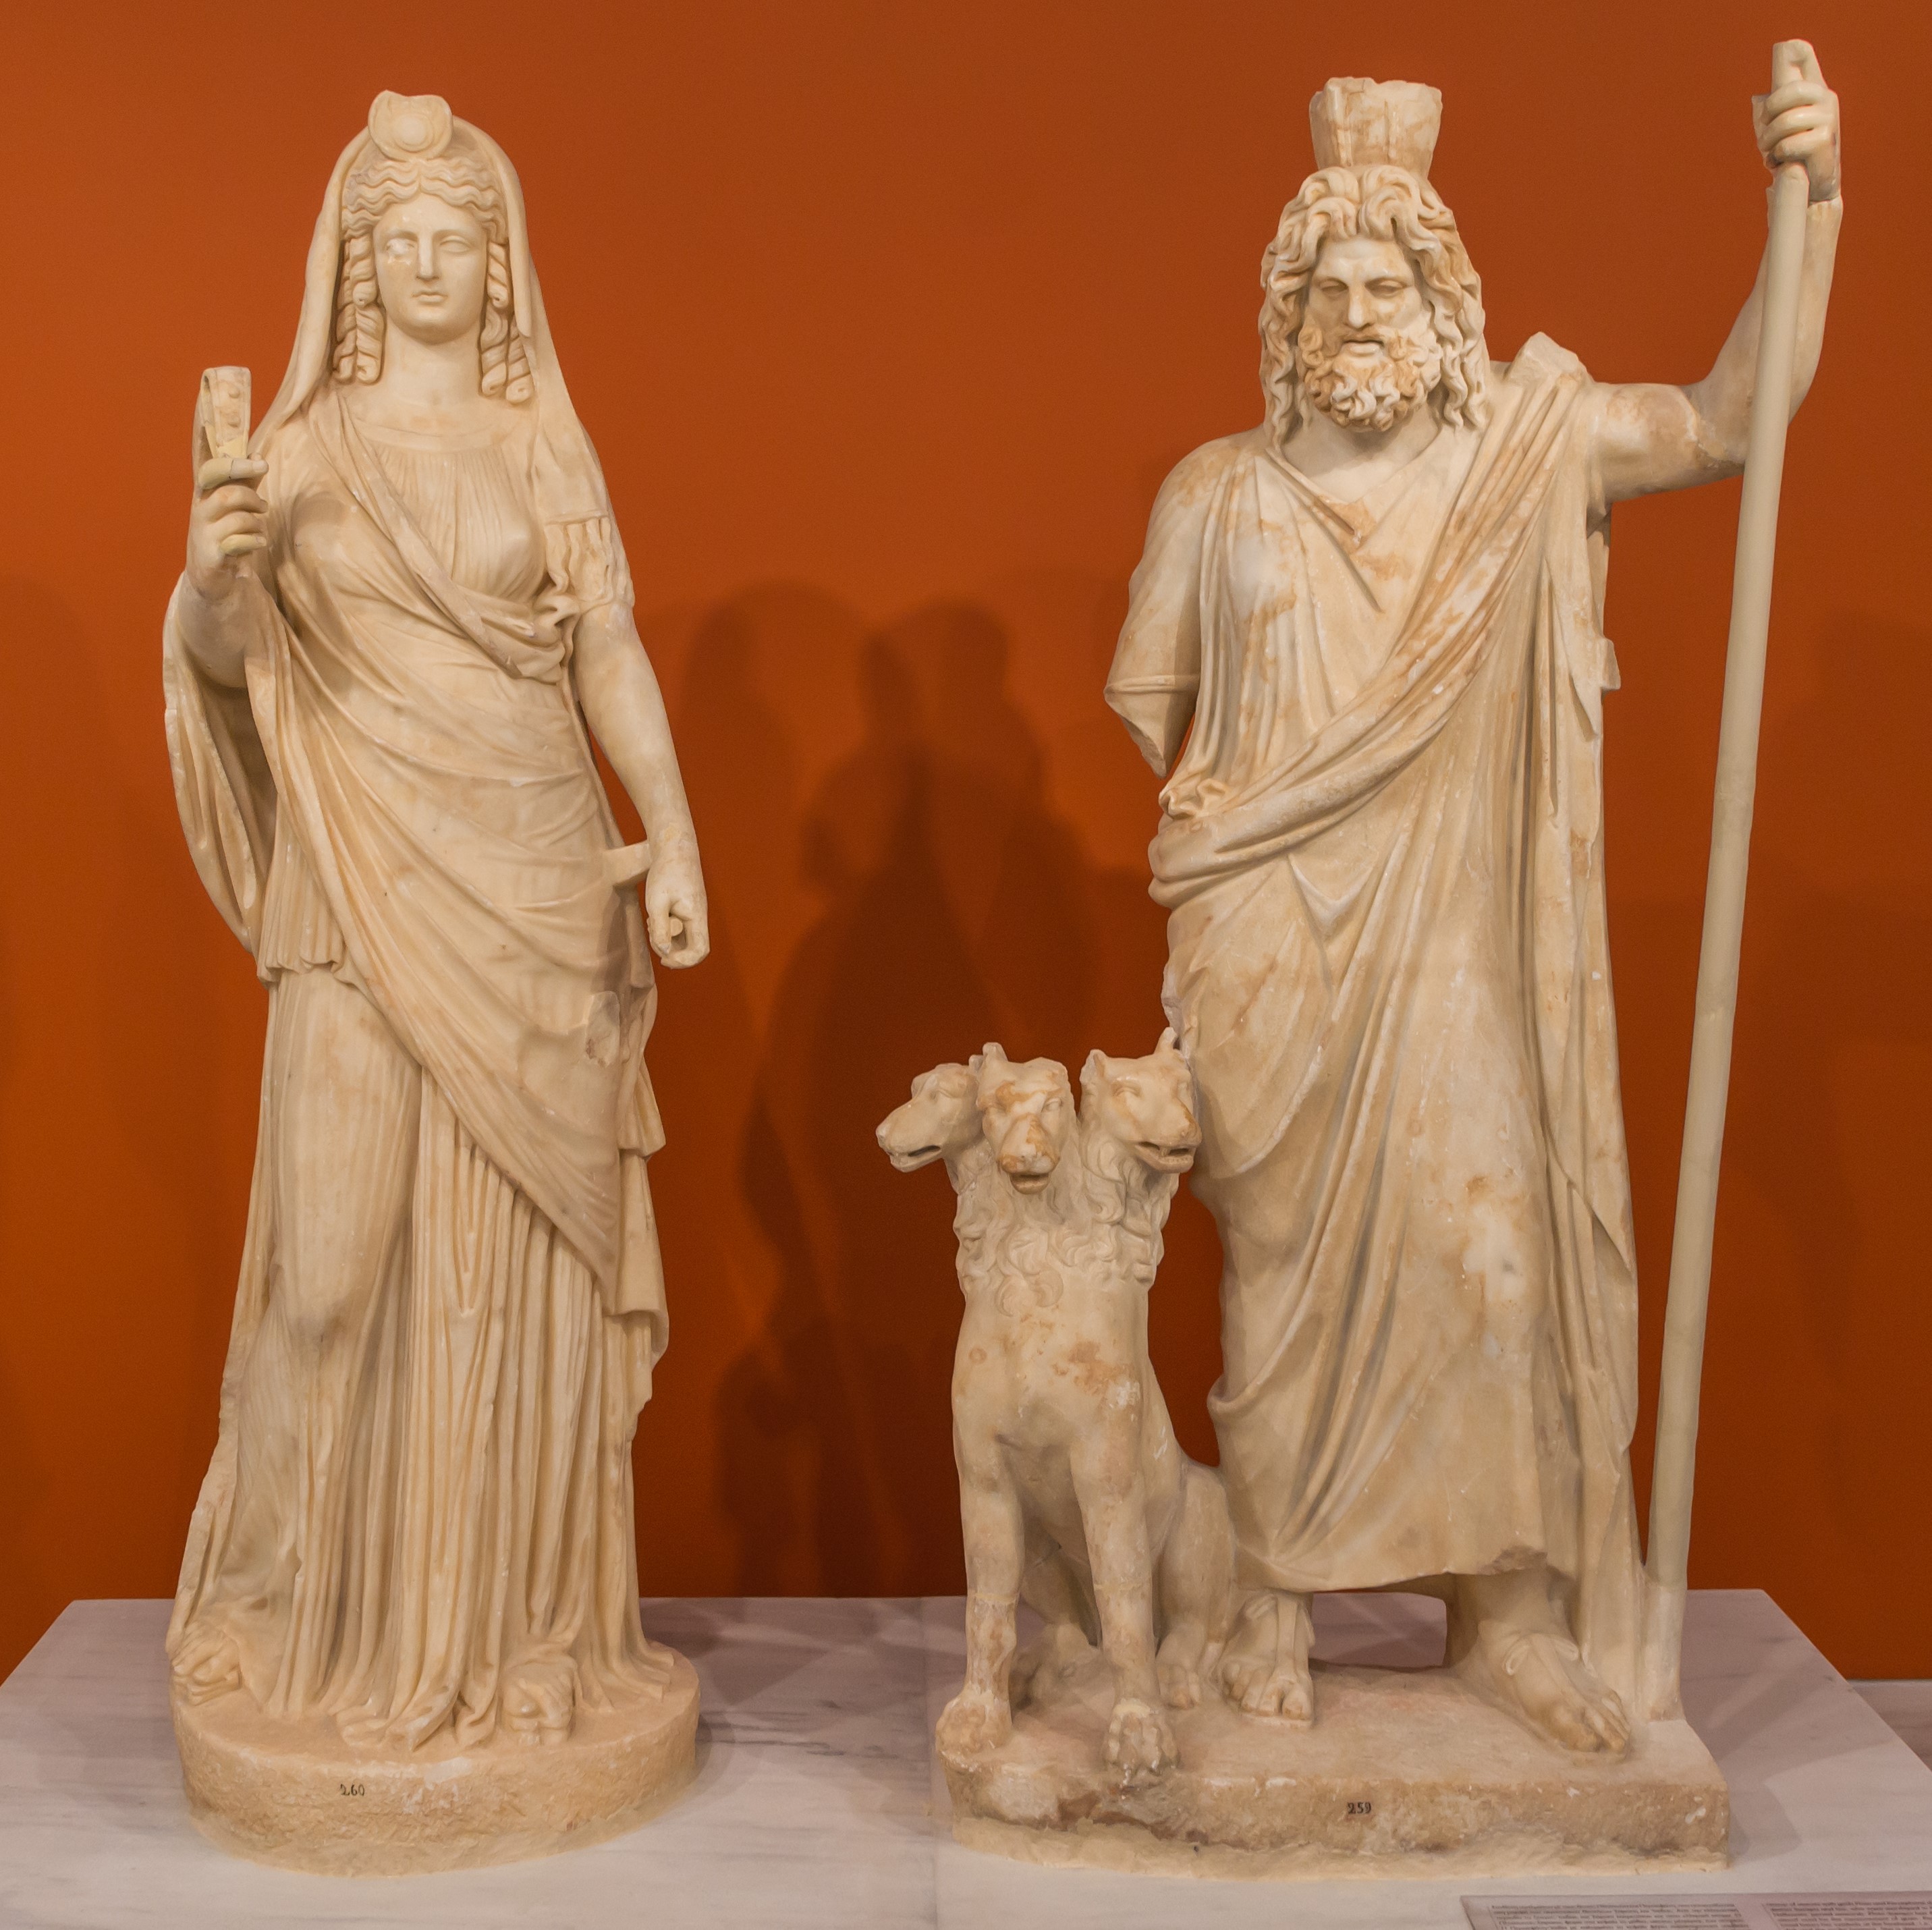 Isis as persephone and hades as Serapis